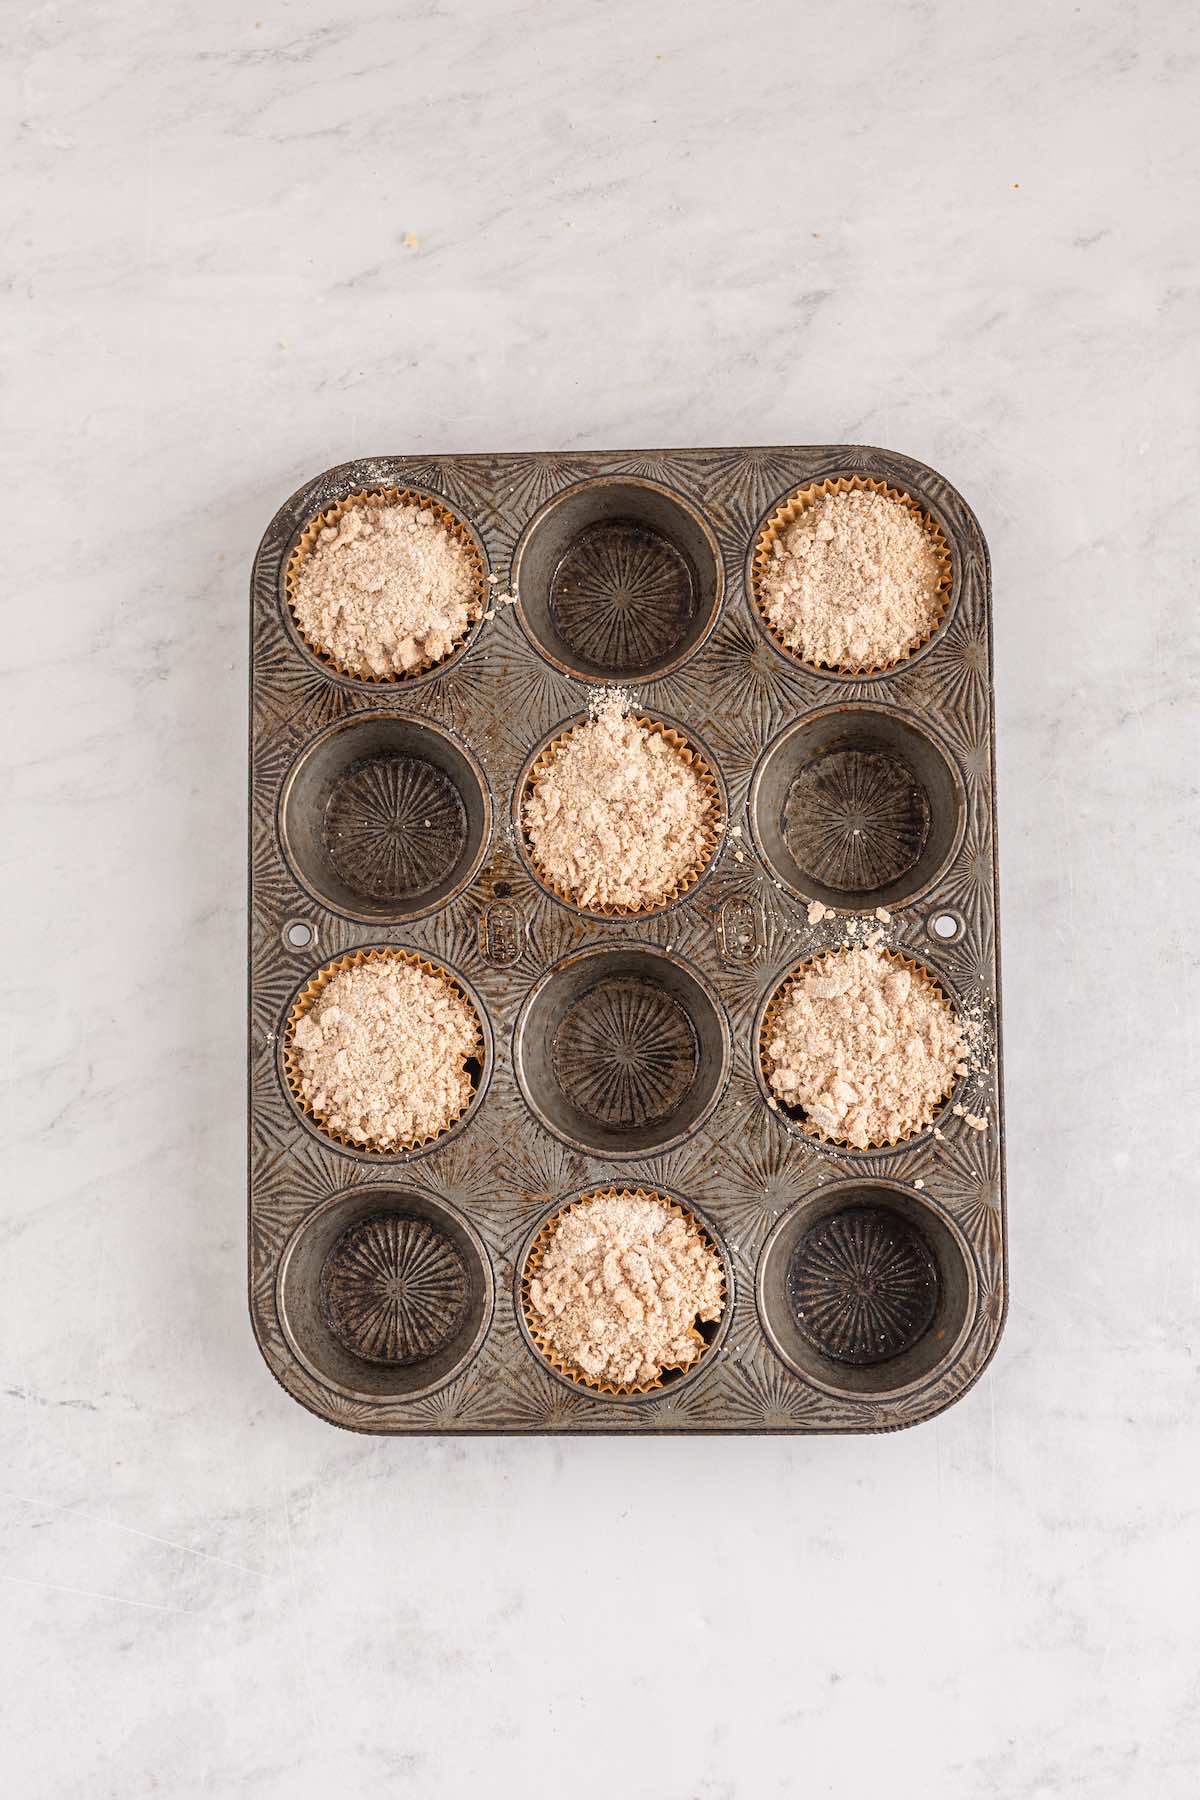 Portioned muffins in a muffin tin, topped by a spiced crumb topping.